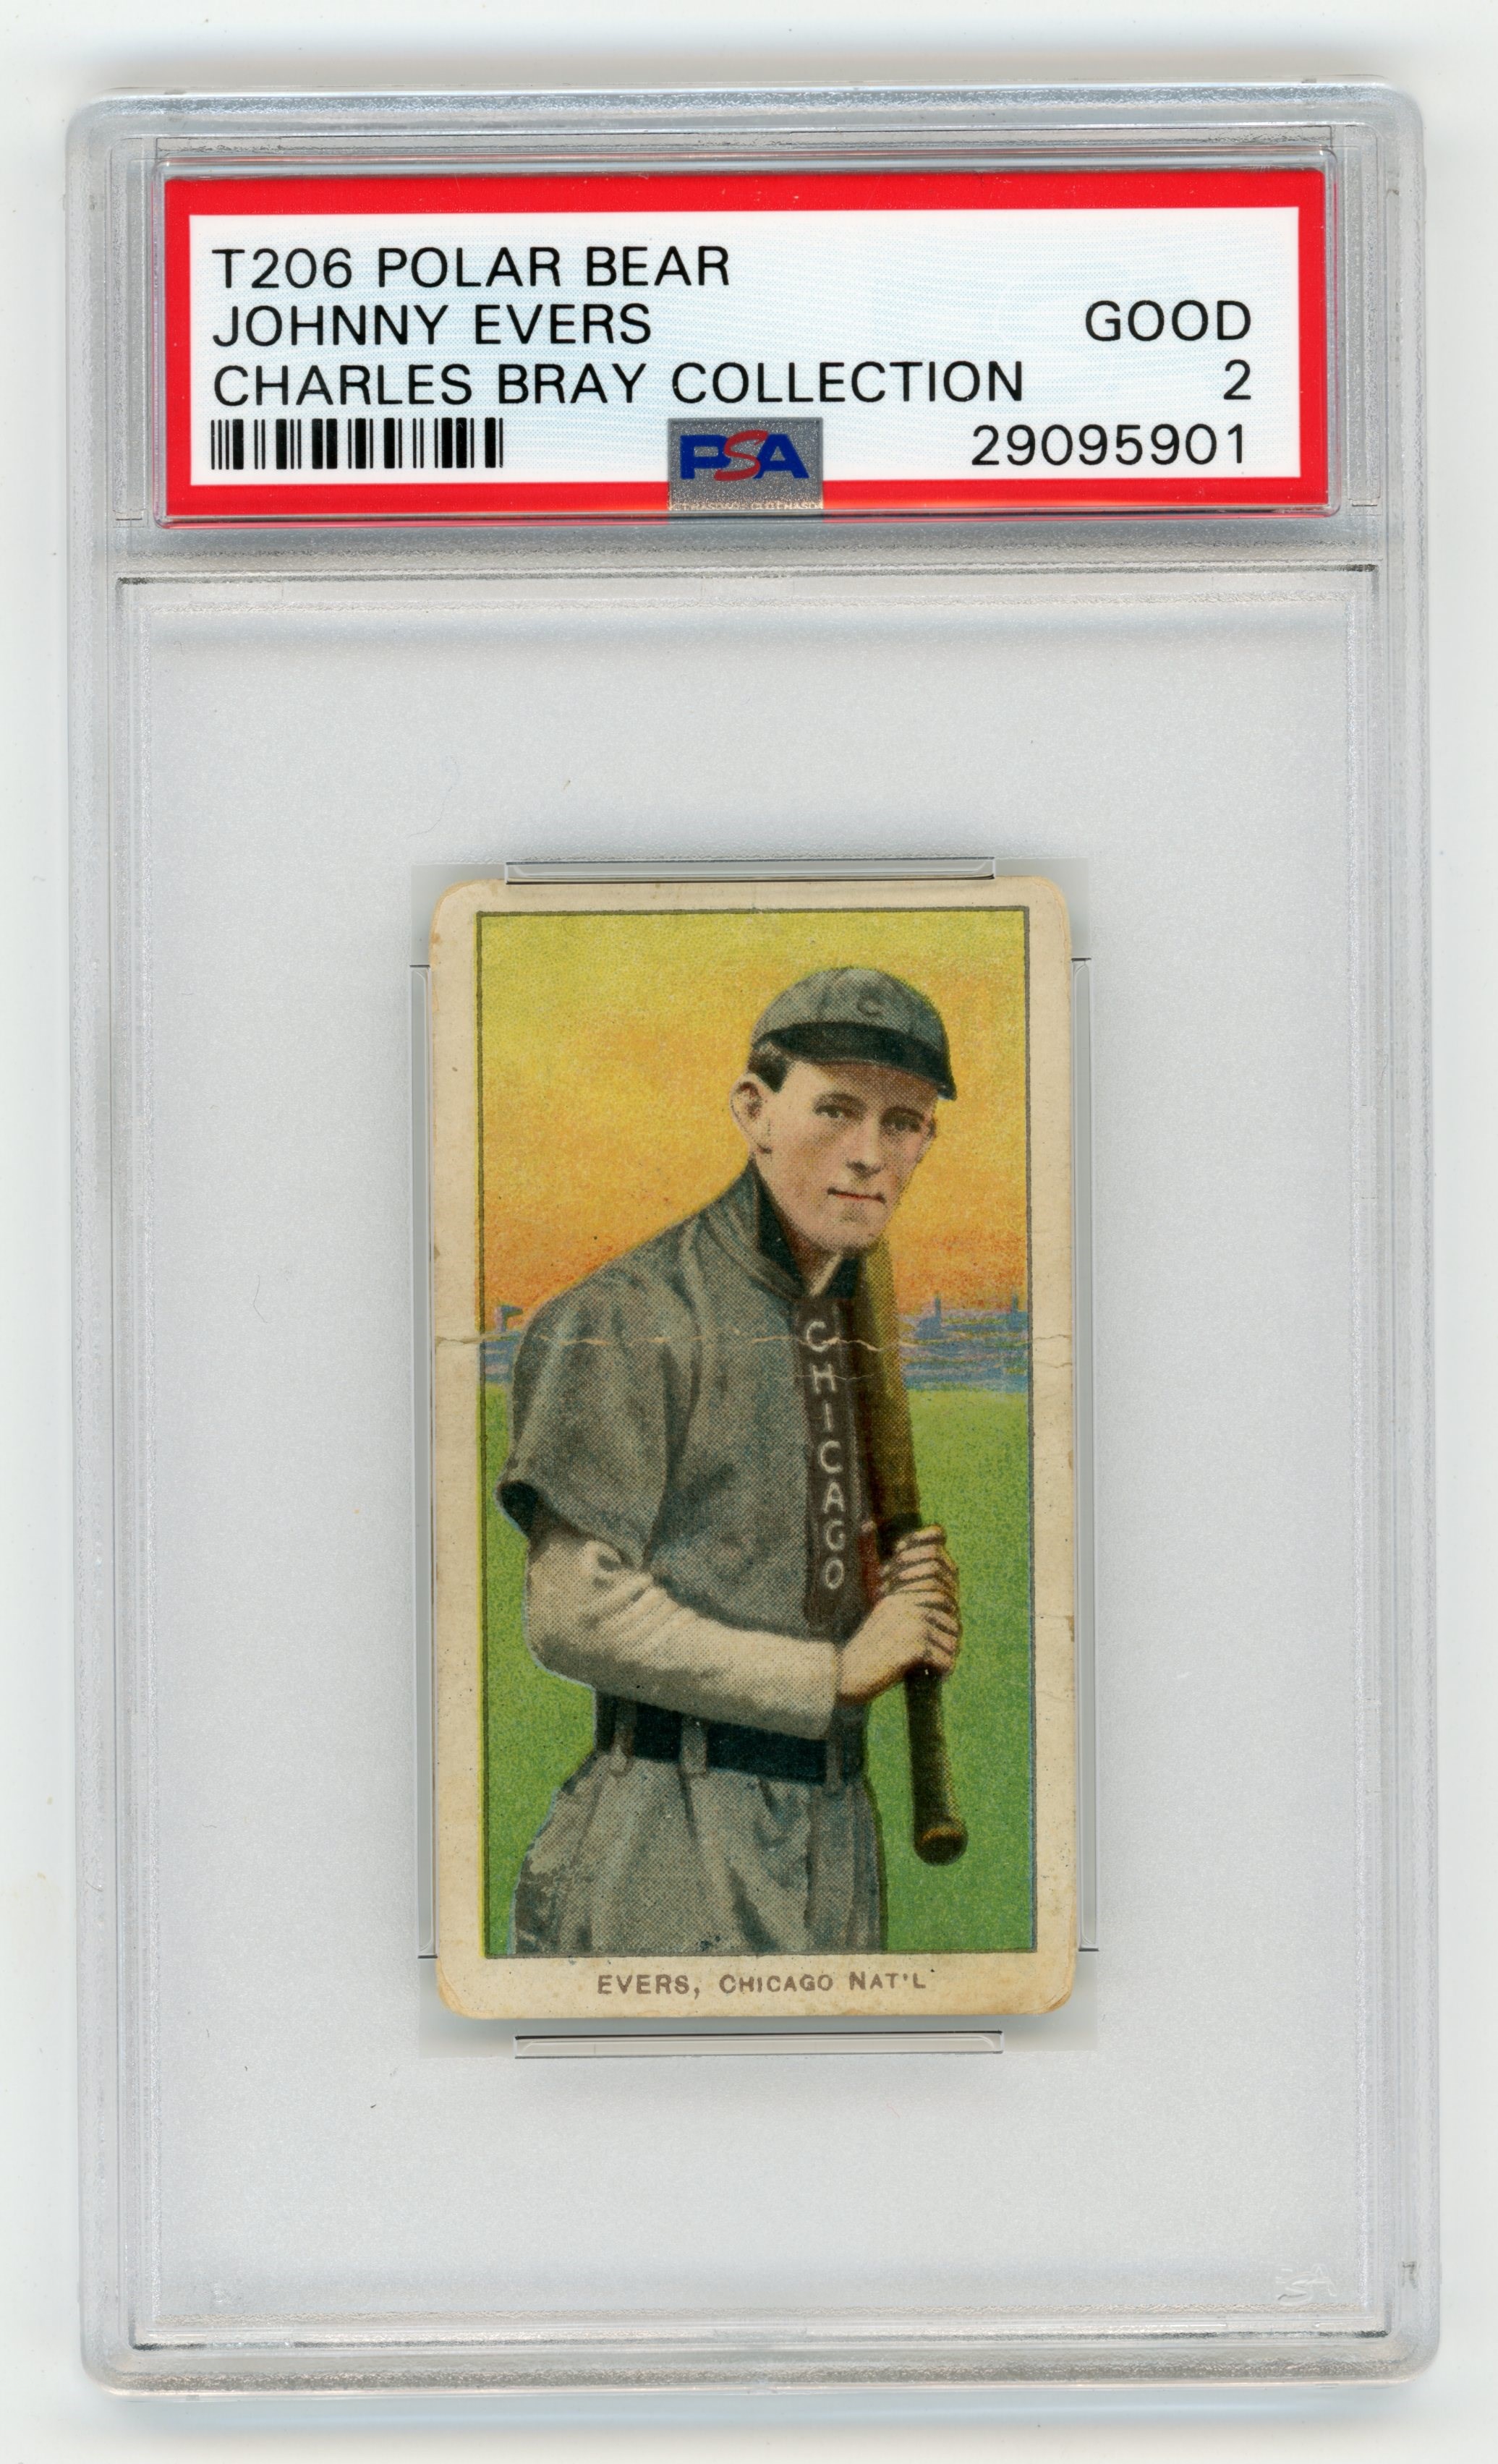 Baseball and Trading Cards - T206 Polar Bear Johnny Evers PSA 2 From Charles Bray Collection